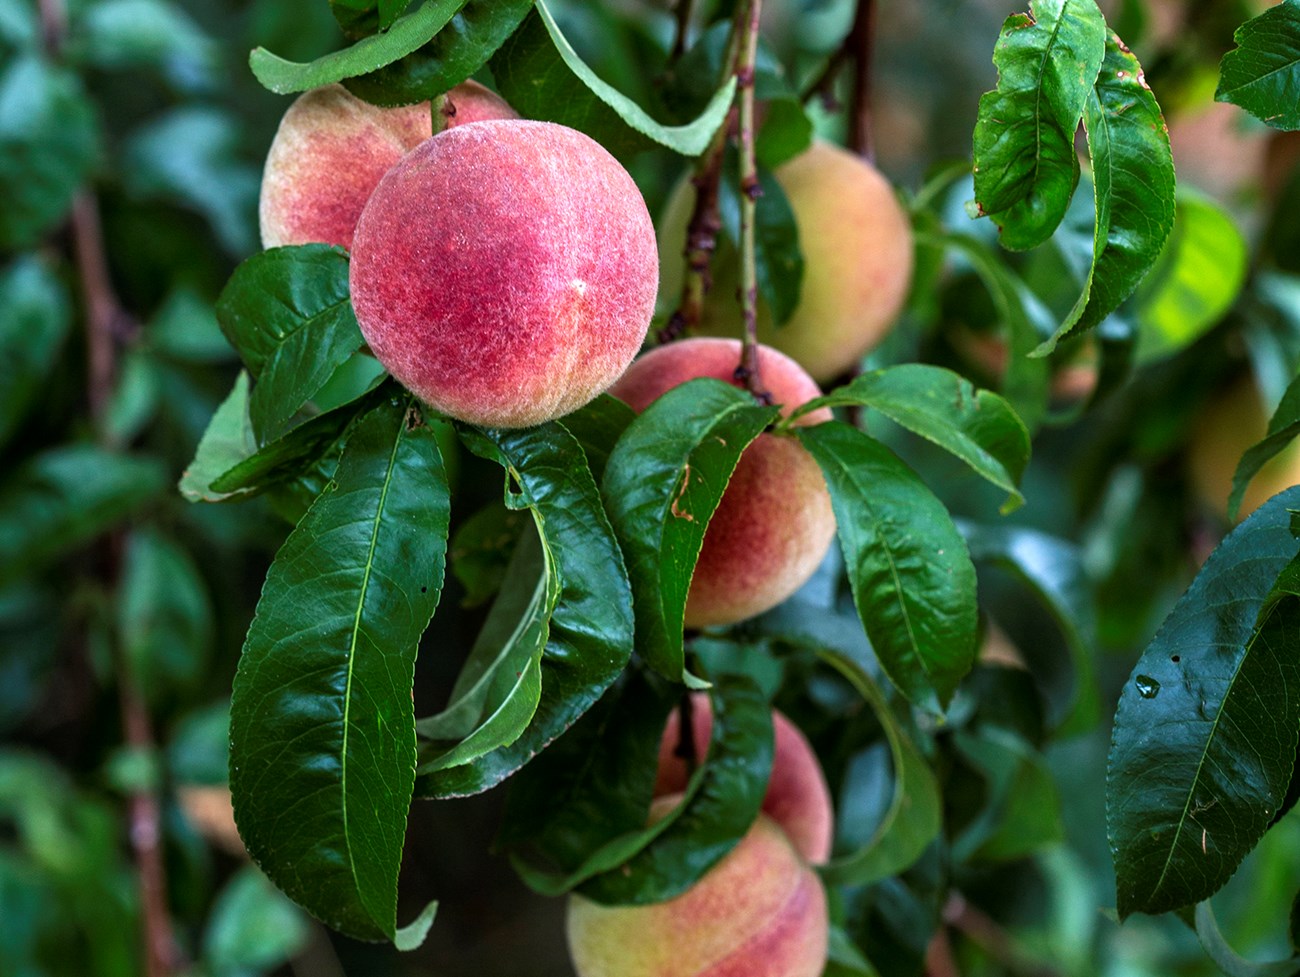 Red and yellow peaches on a tree with dark green leaves